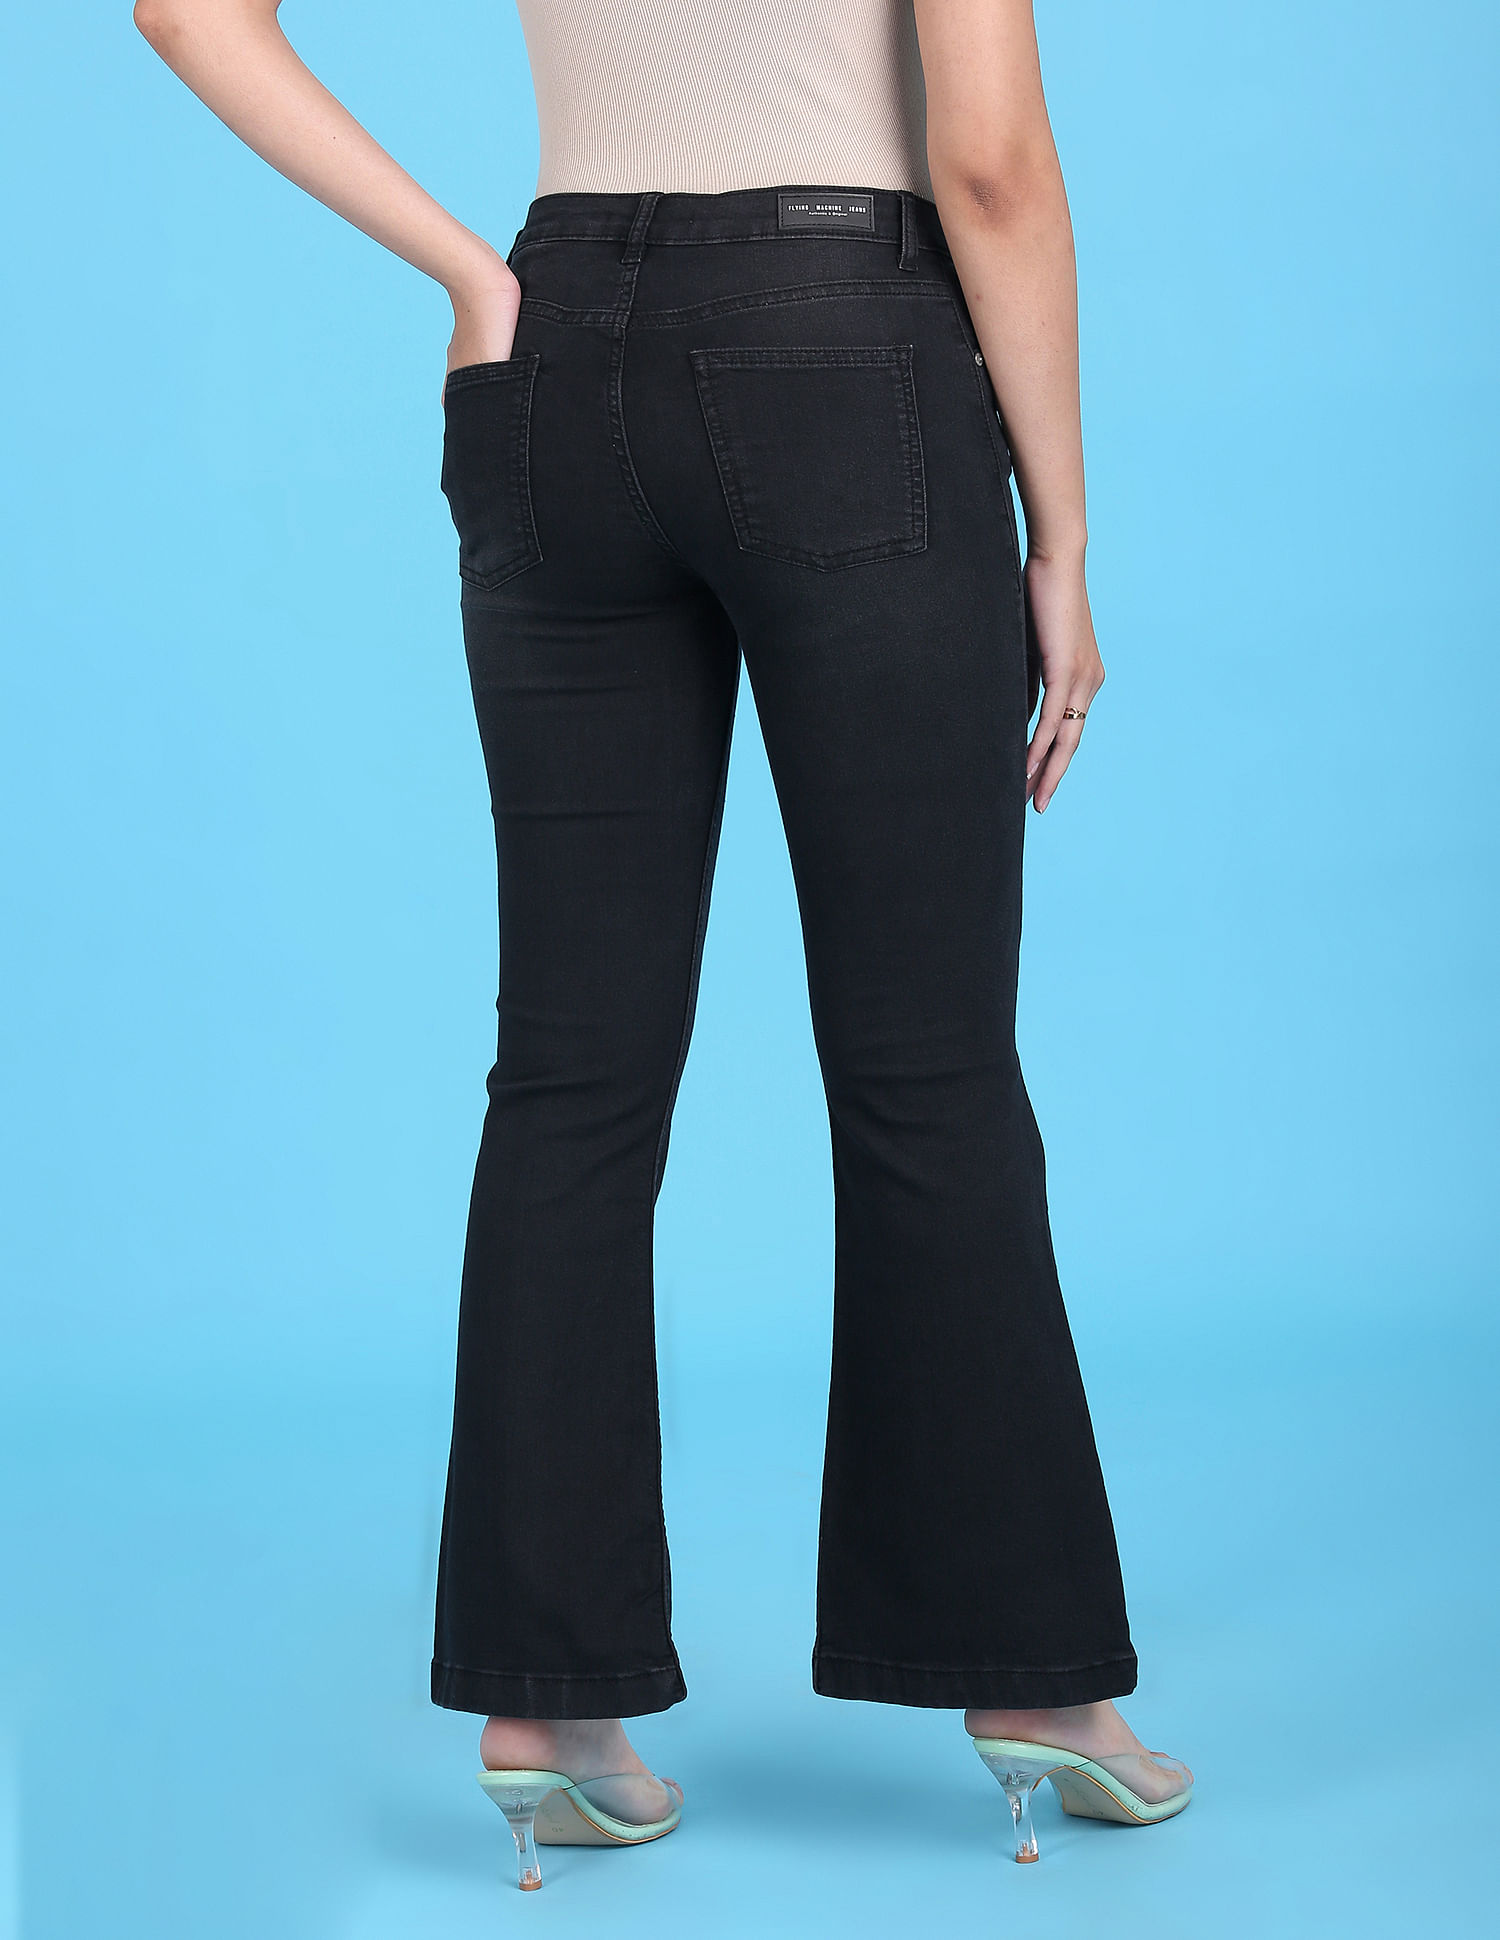 Express Black & Grey Flare Jeans for Women